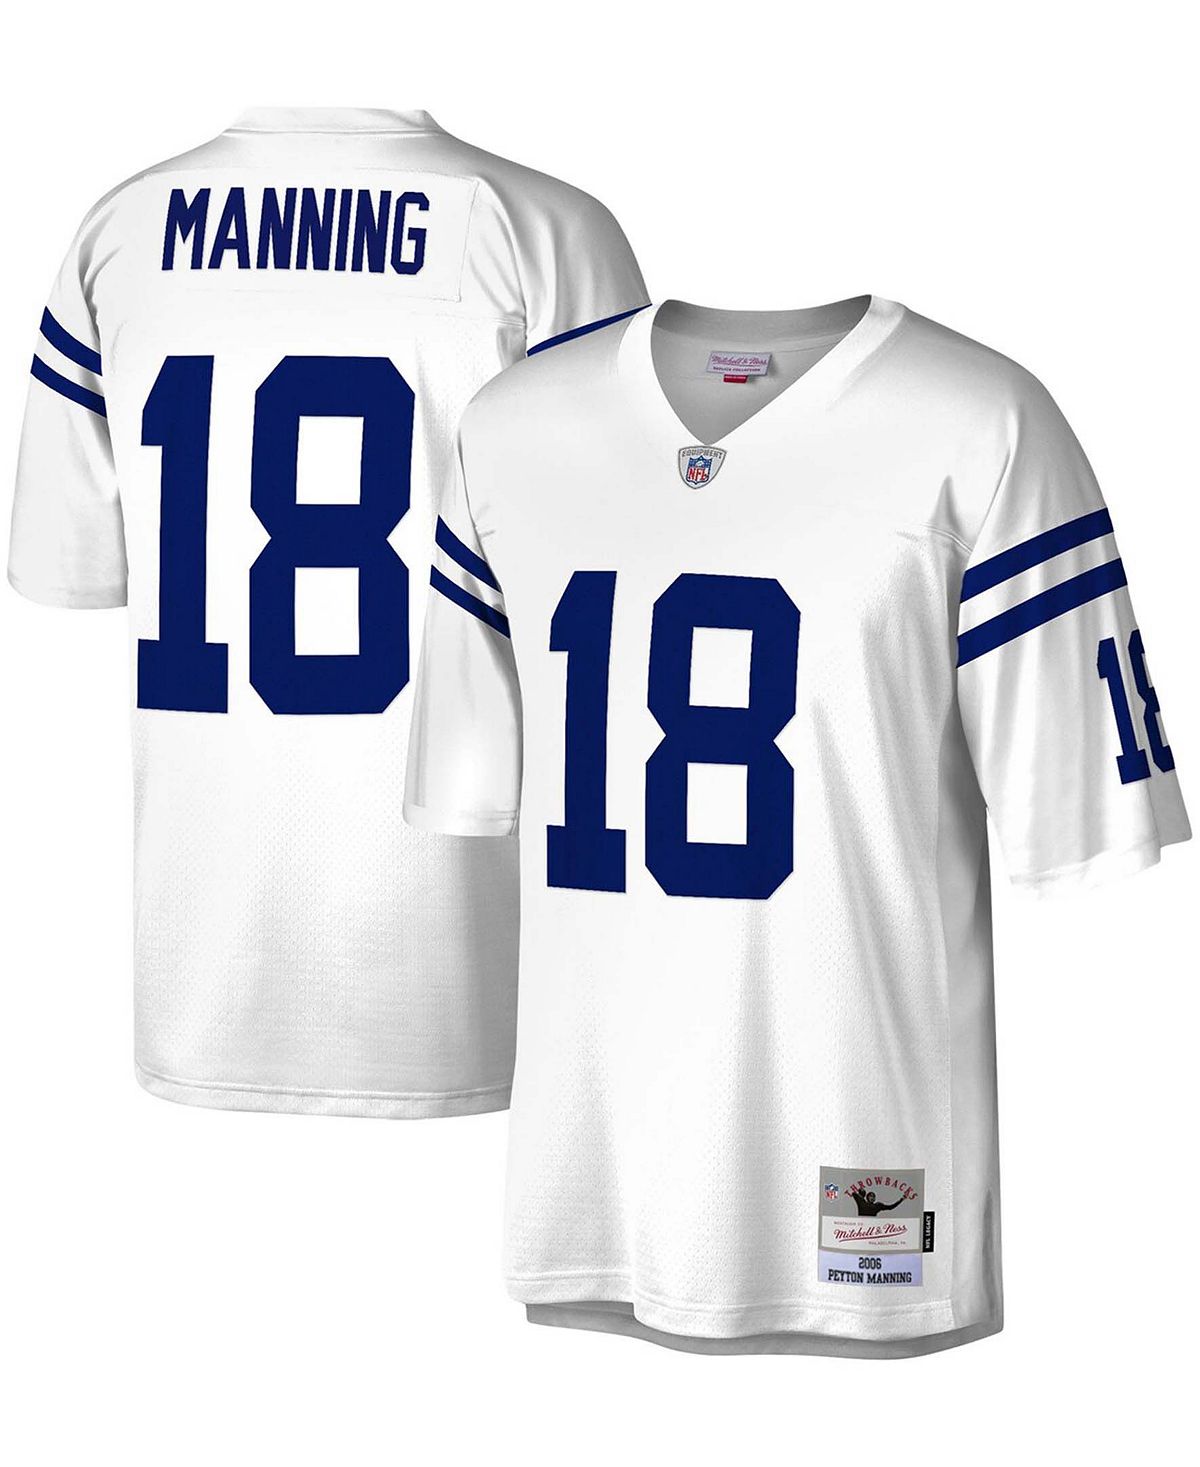 Футболка Mitchell & Ness Men's Peyton Manning White Indianapolis Colts Legacy, белый youth s stitch indianapolis american football jersey taylor nelson leonard manning pittman hilton rivers customized fans jerseys